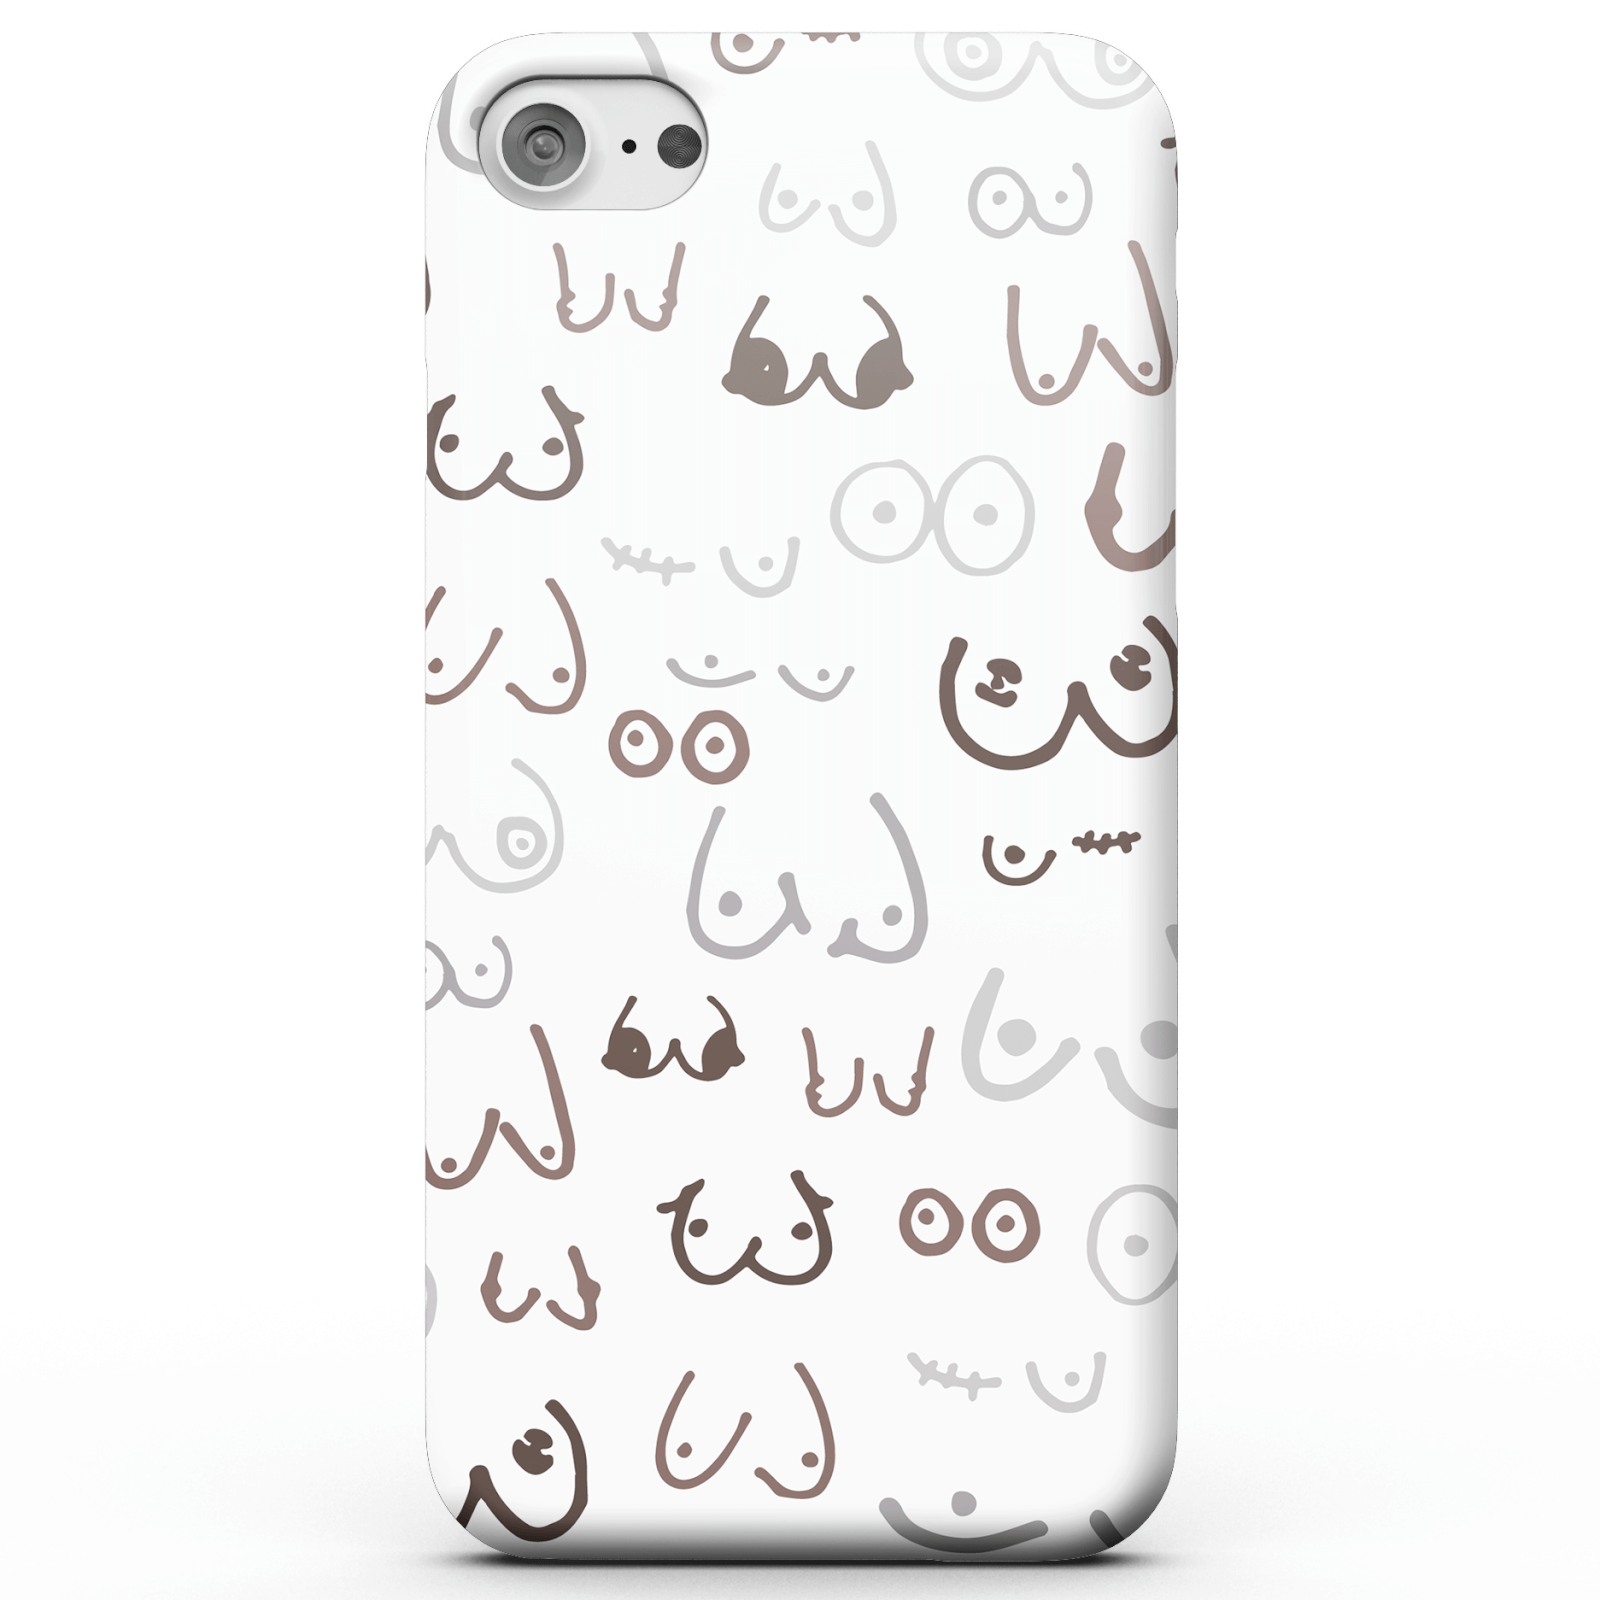 Multishade Boobs Phone Case for iPhone and Android - iPhone 5/5s - Snap Case - Matte